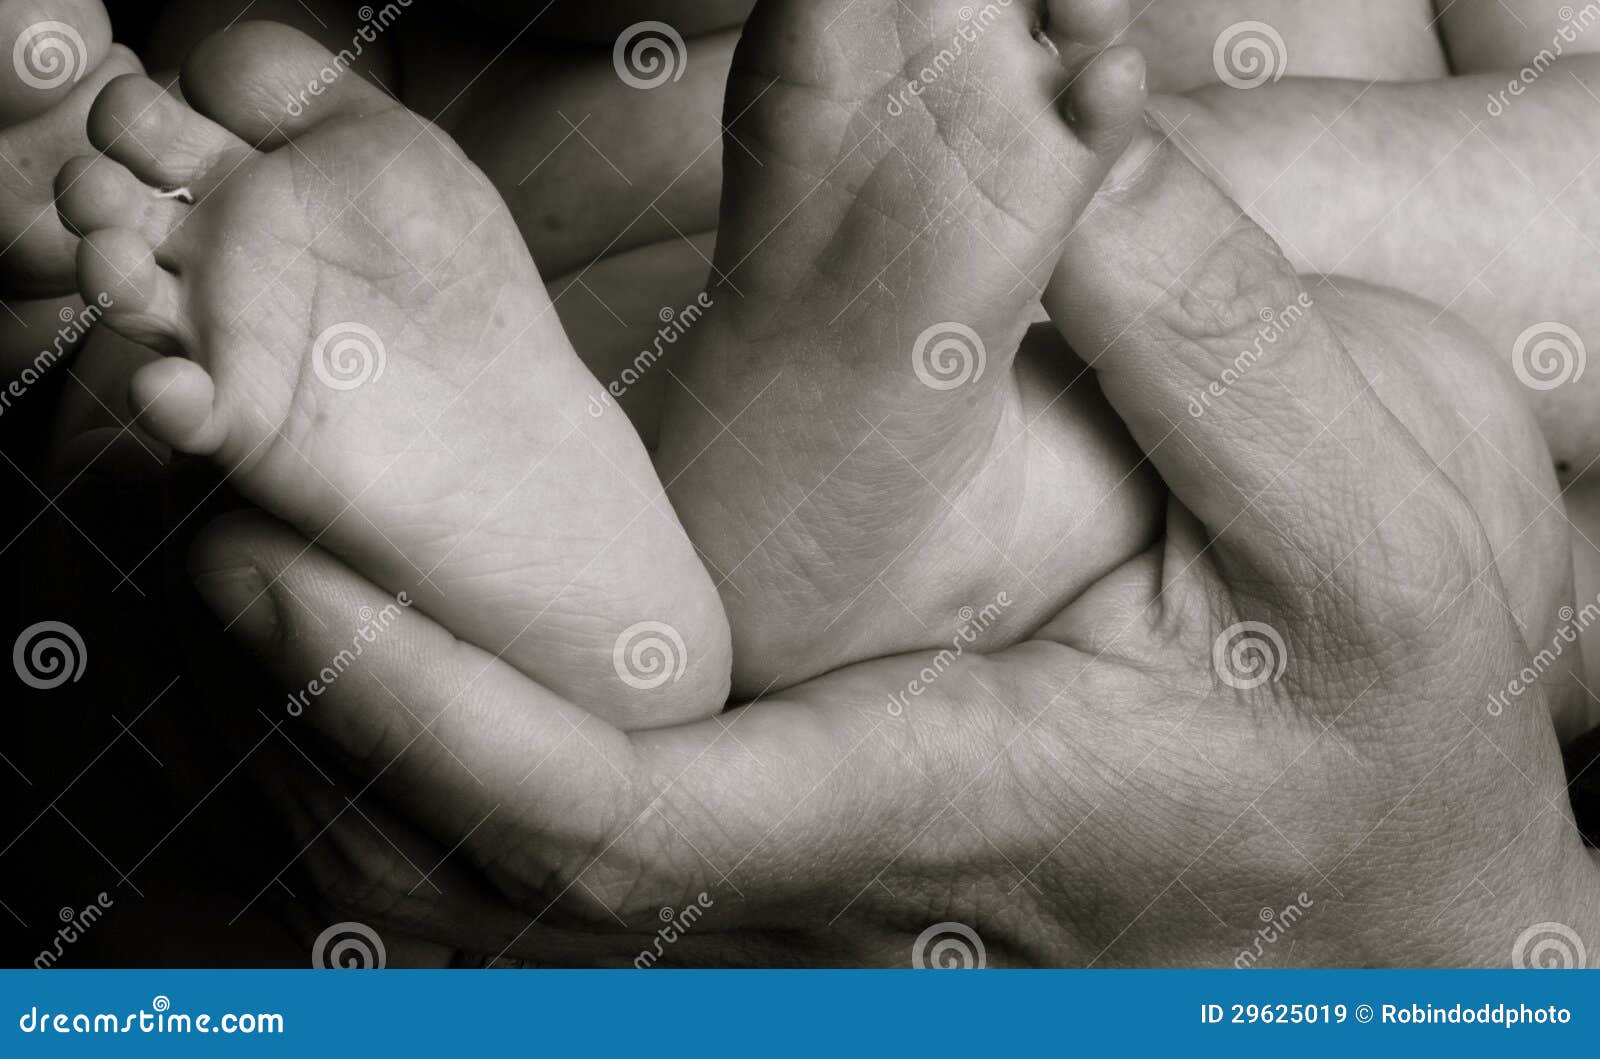 baby feet and daddy's hands